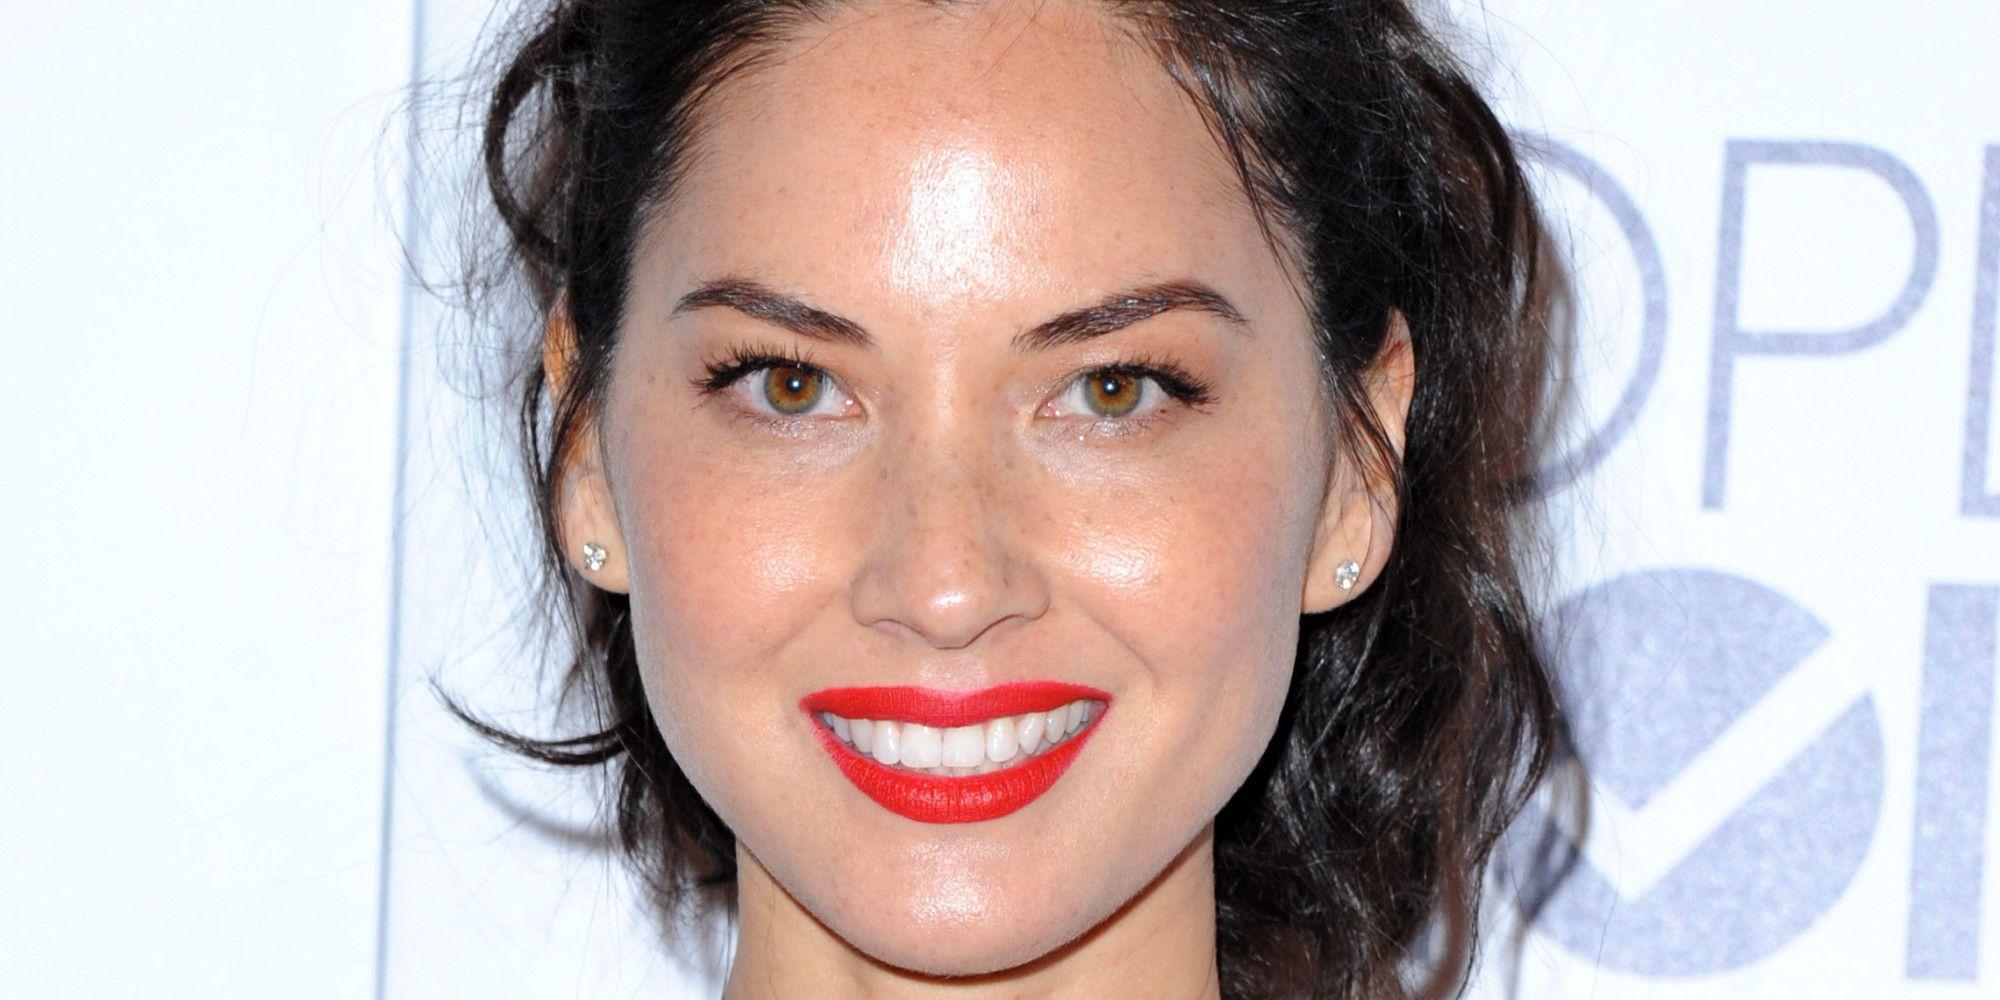 Olivia Munn Brings In The New Year With Gorgeous, Glowing Skin